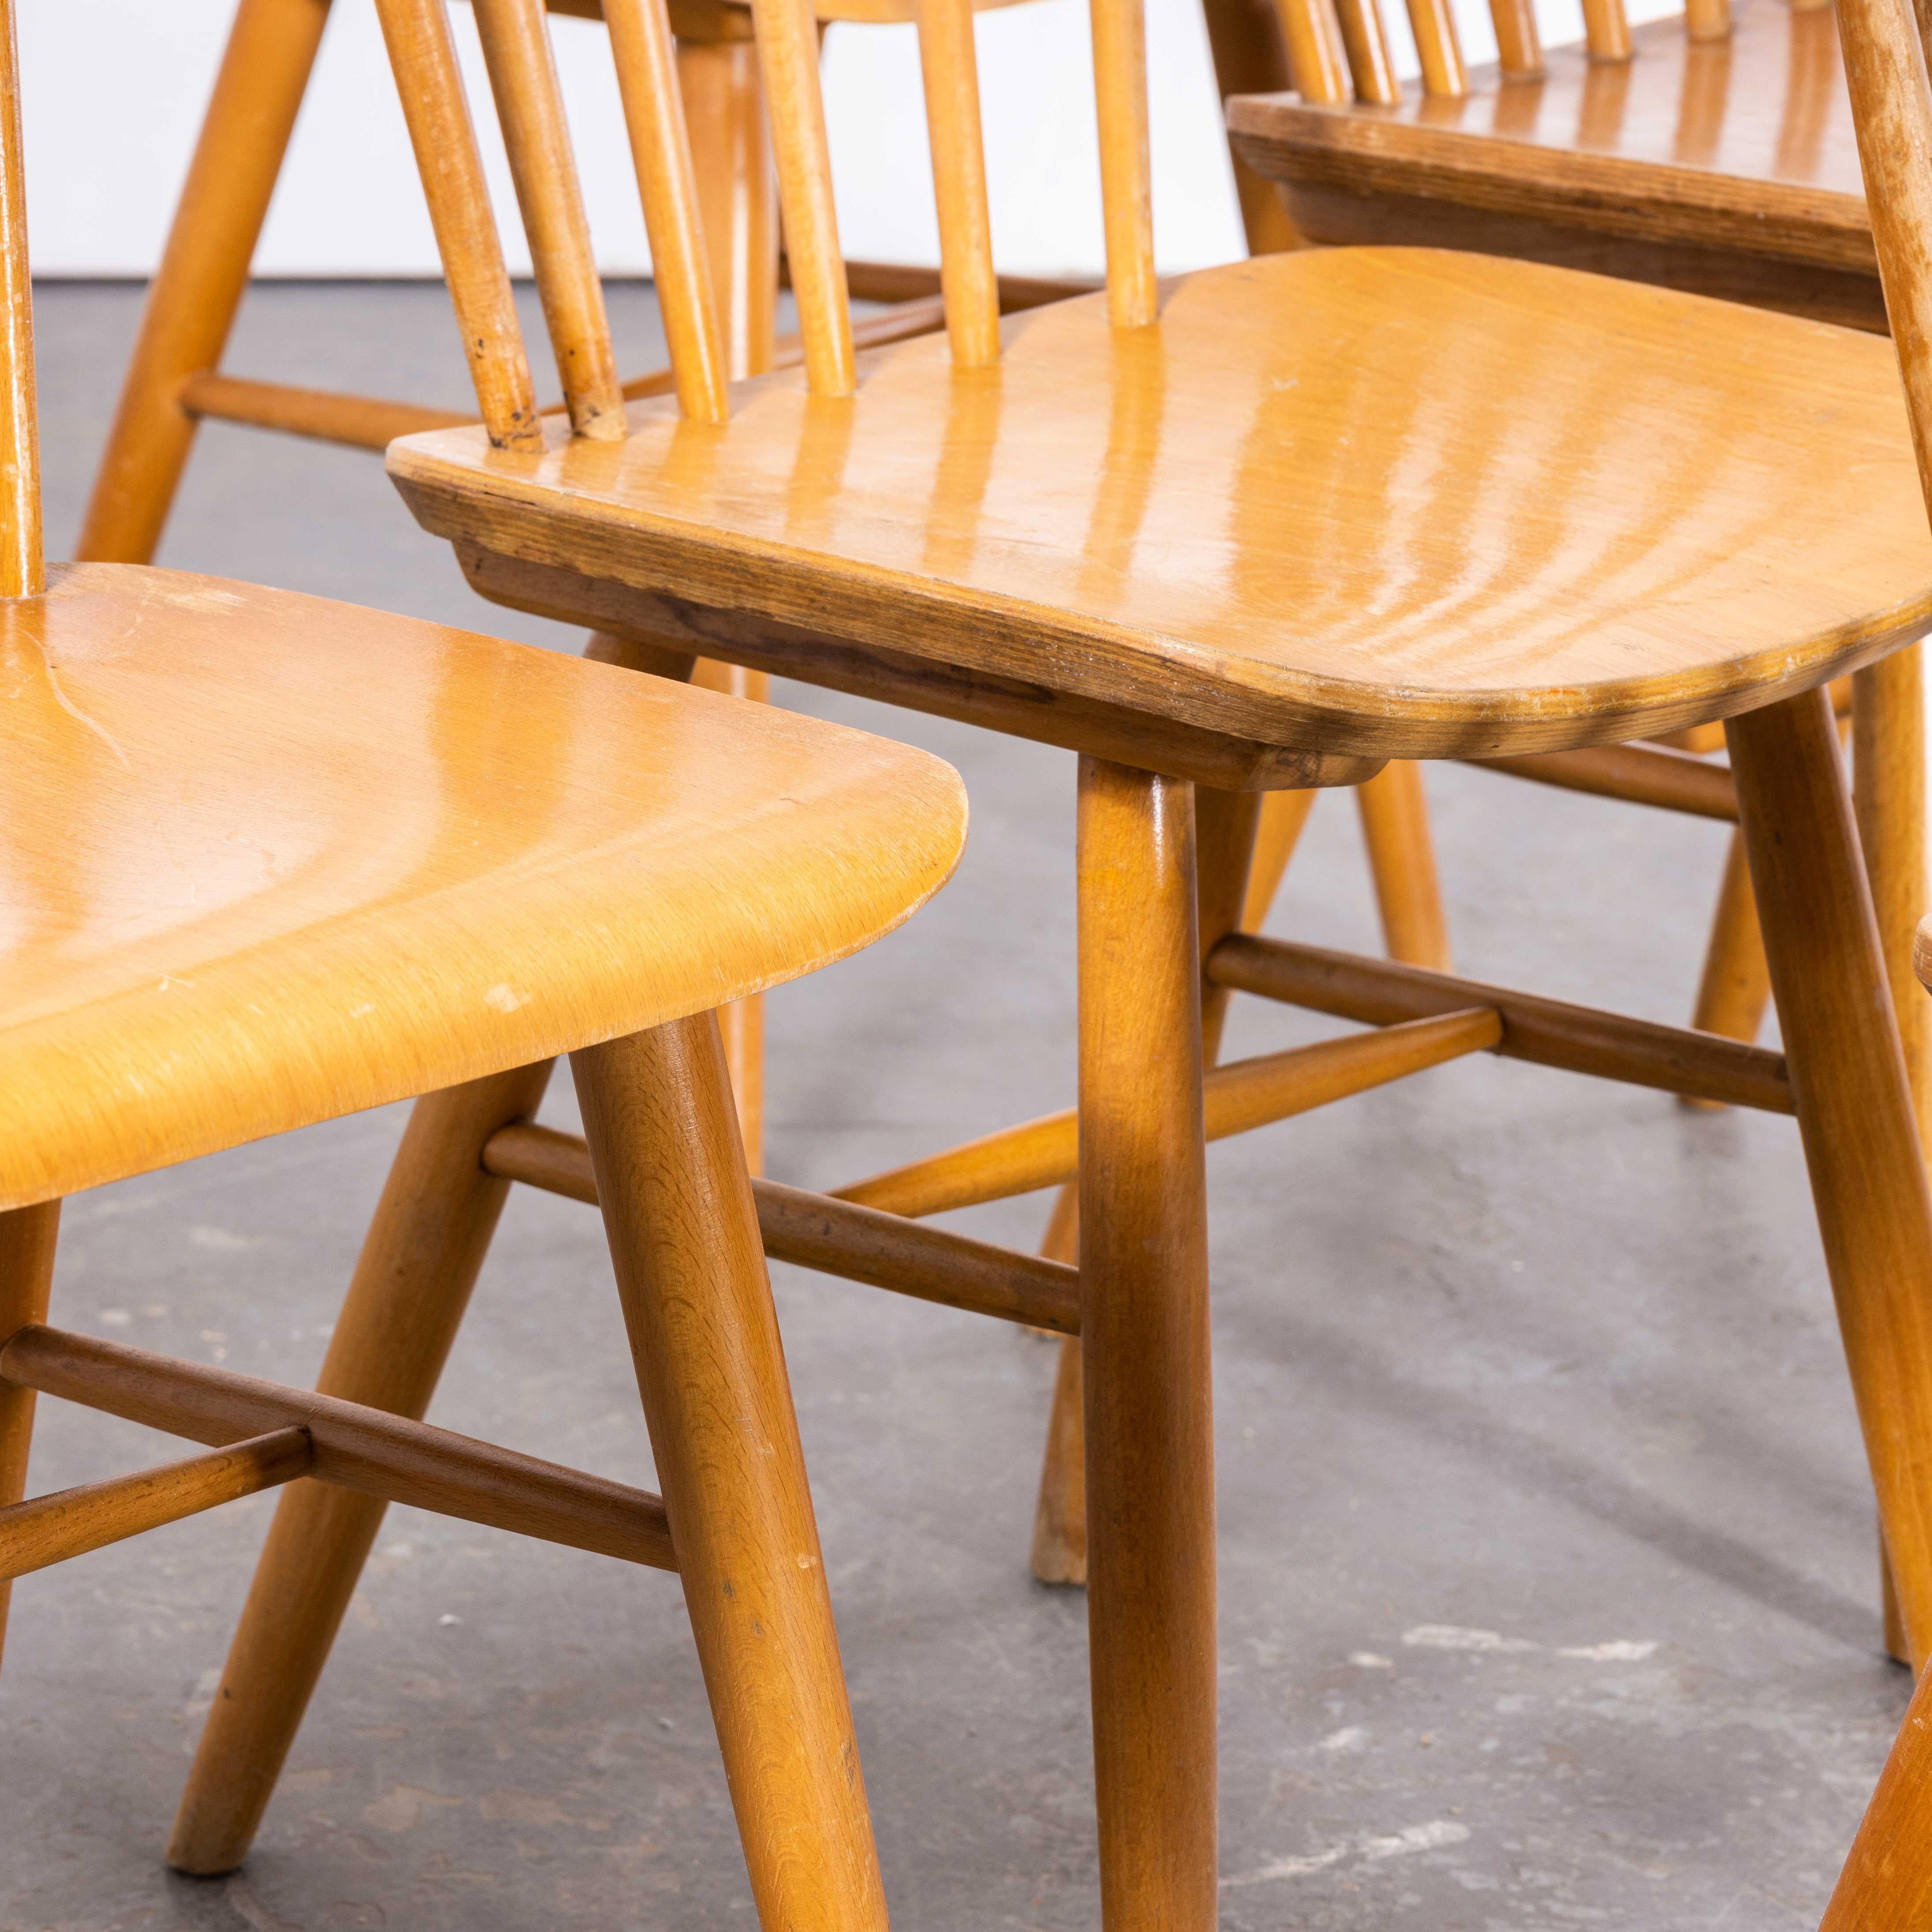 1950s Harlequin Stickback Dining Chairs By Ton – Set Of Six
1950s Harlequin Stickback Dining Chairs By Ton – Set Of Six. These chairs were produced by the famous Czech firm Ton, a post war spin off from the famous Thonet factory that was carved up